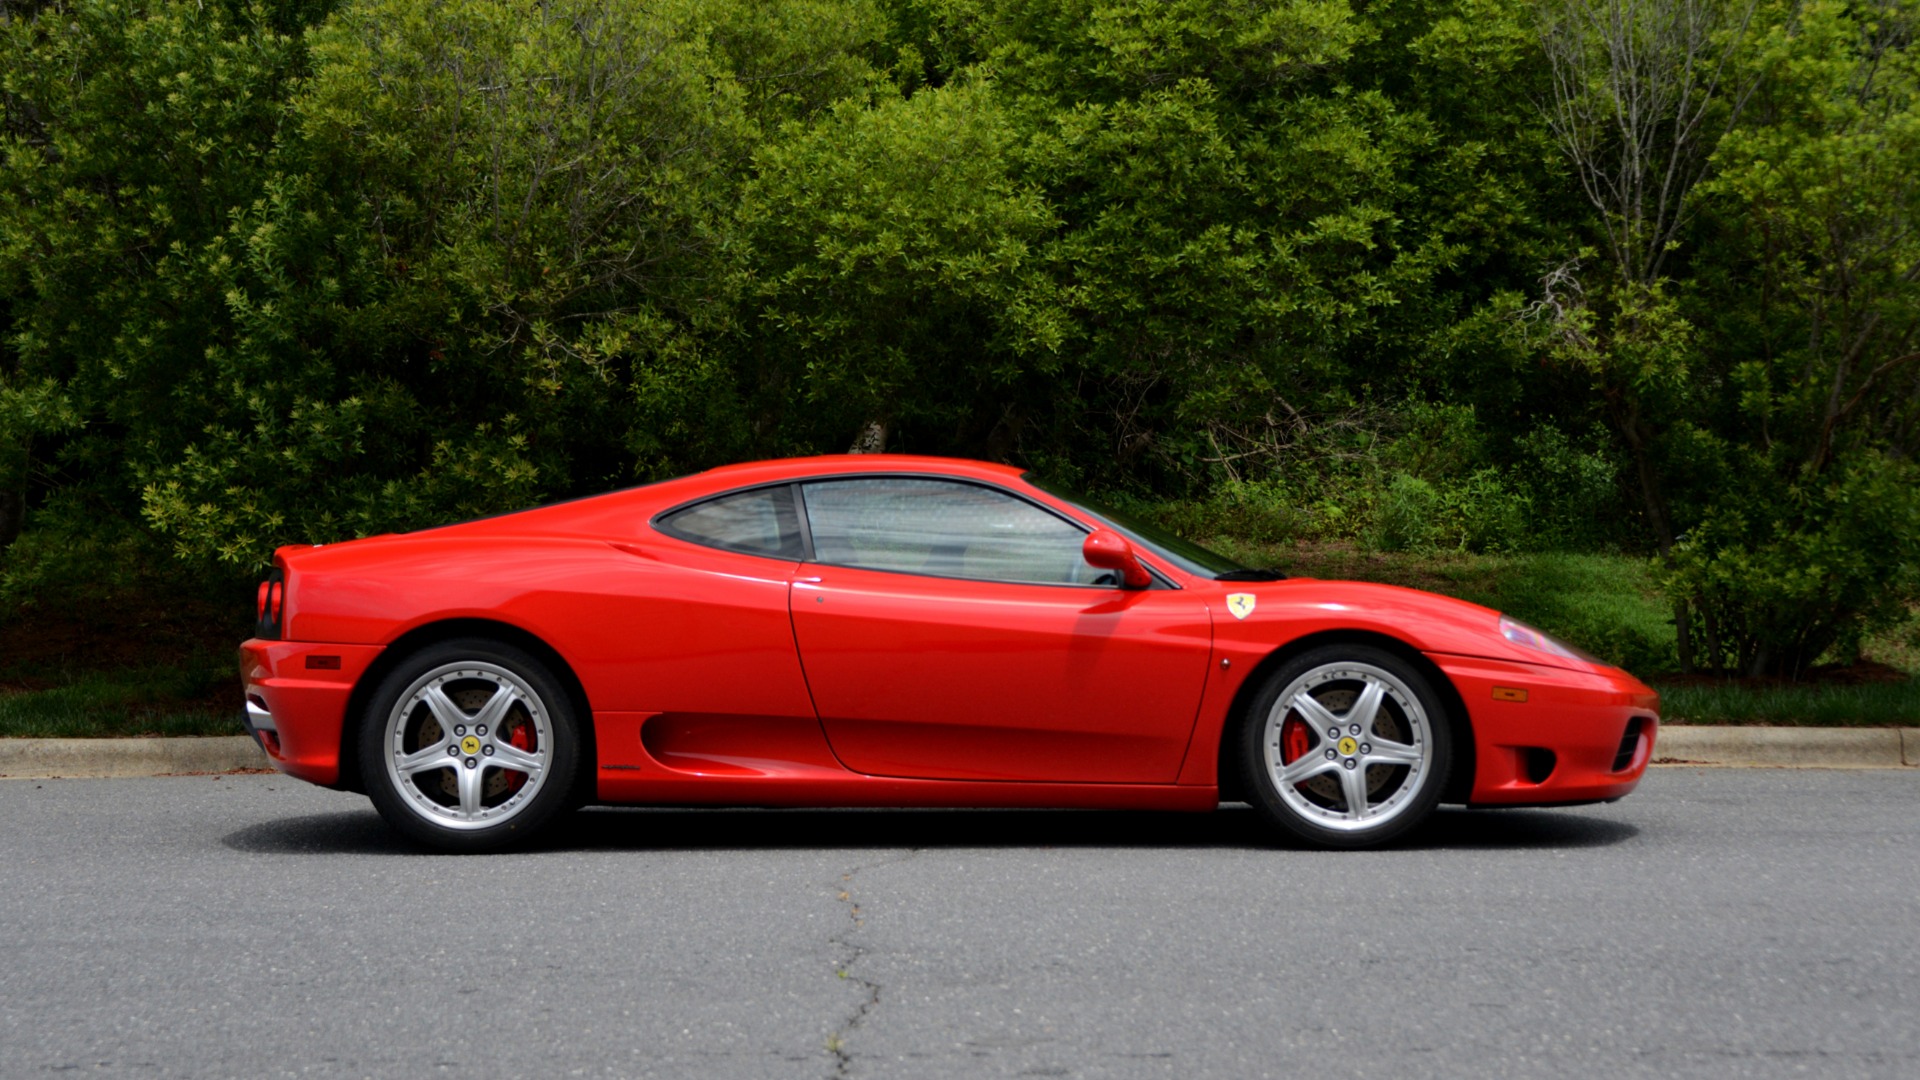 Used 2004 Ferrari 360 MODENA COUPE / GATED 6-SPD MANUAL / SUNROOF / LOW MILES for sale Sold at Formula Imports in Charlotte NC 28227 5